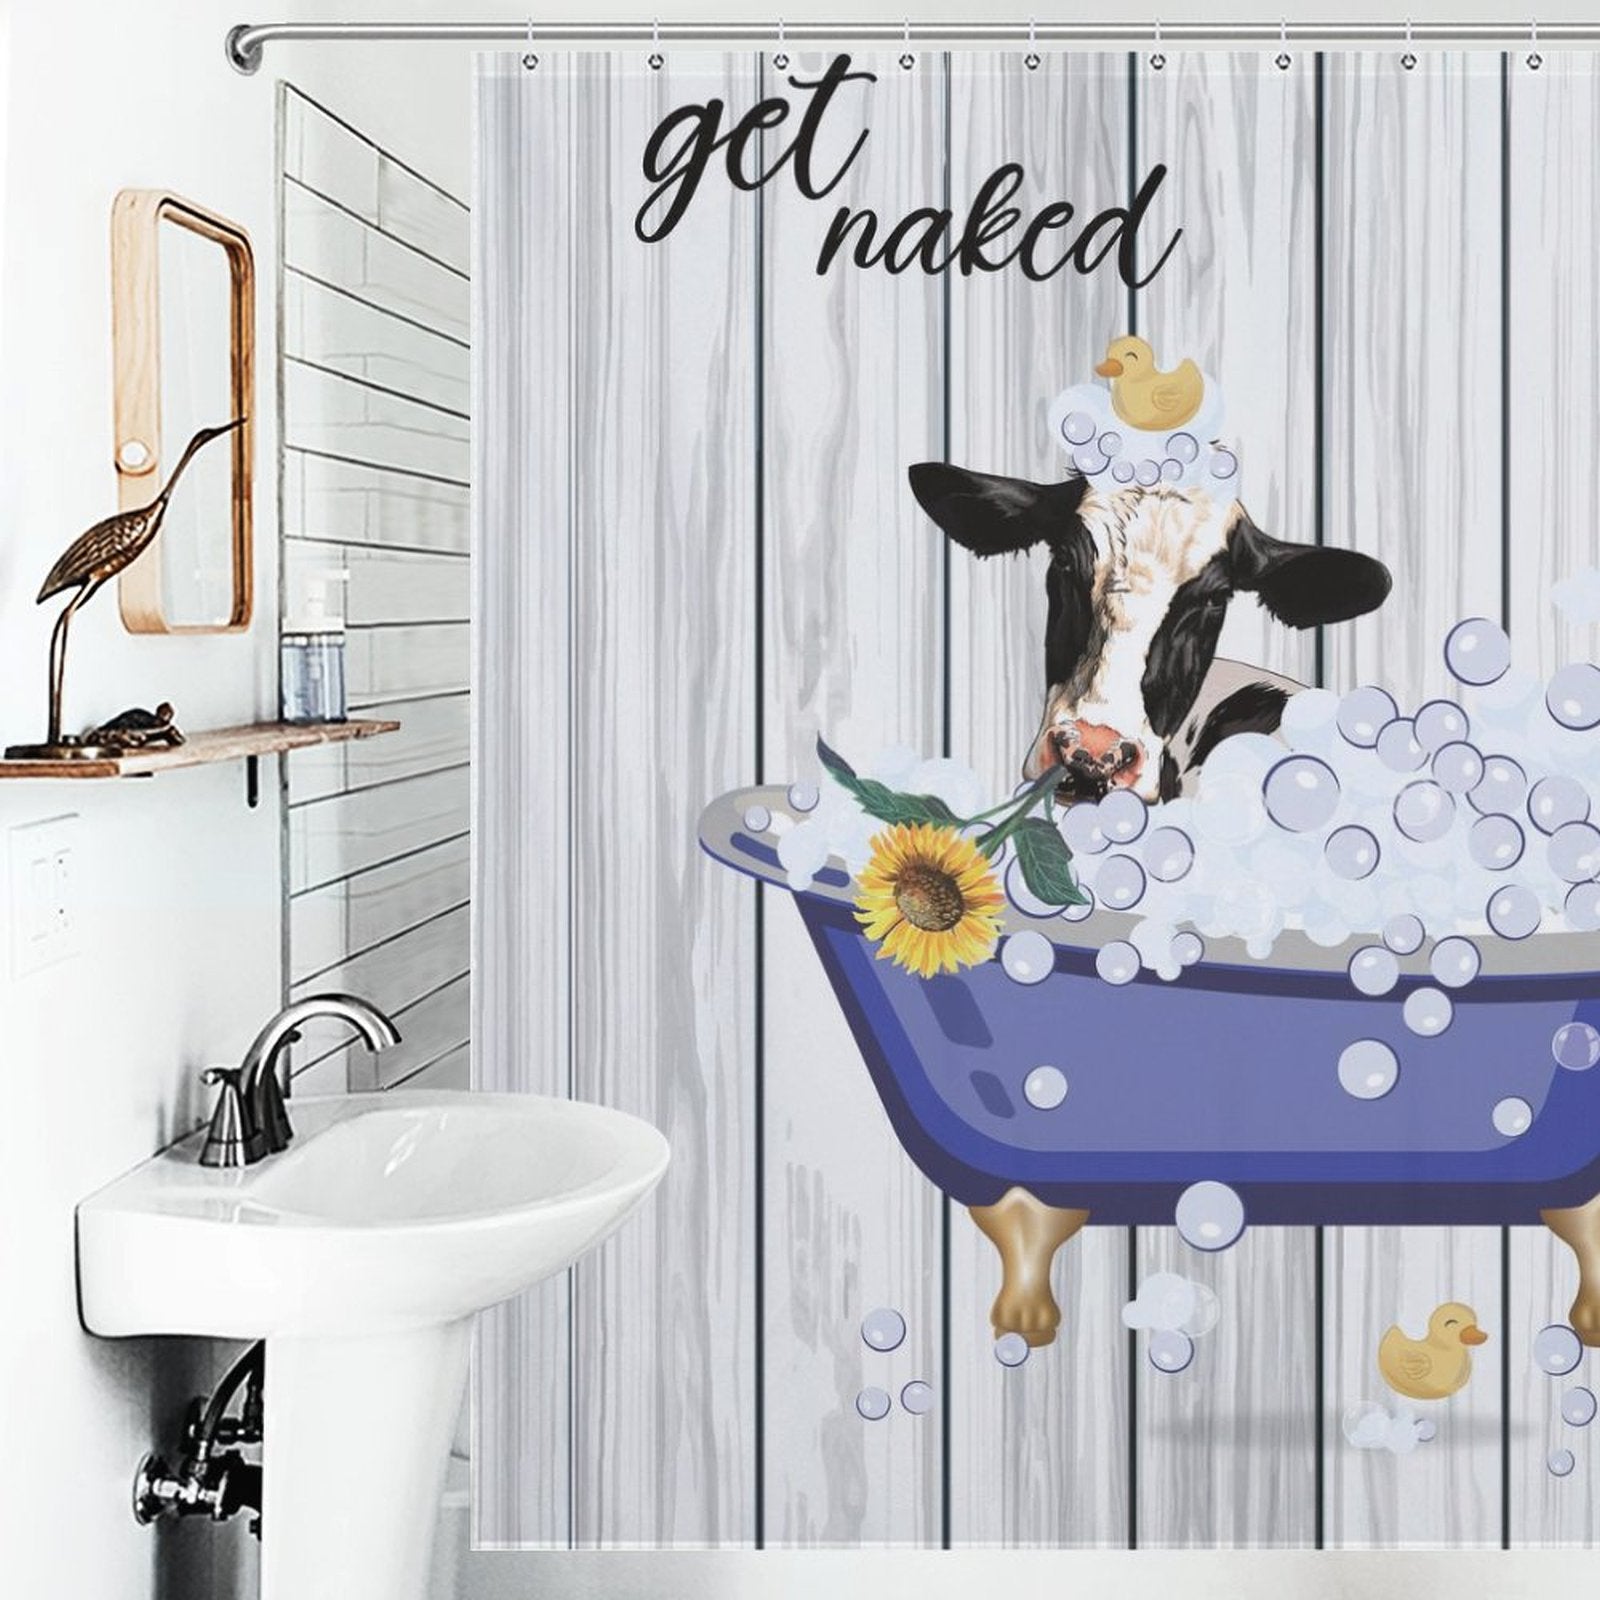 Funny Cow Sunflowers Get Naked Shower Curtain-Cottoncat with a cow sitting in a bathtub filled with bubbles, holding a sunflower. The words "get naked" are printed at the top.